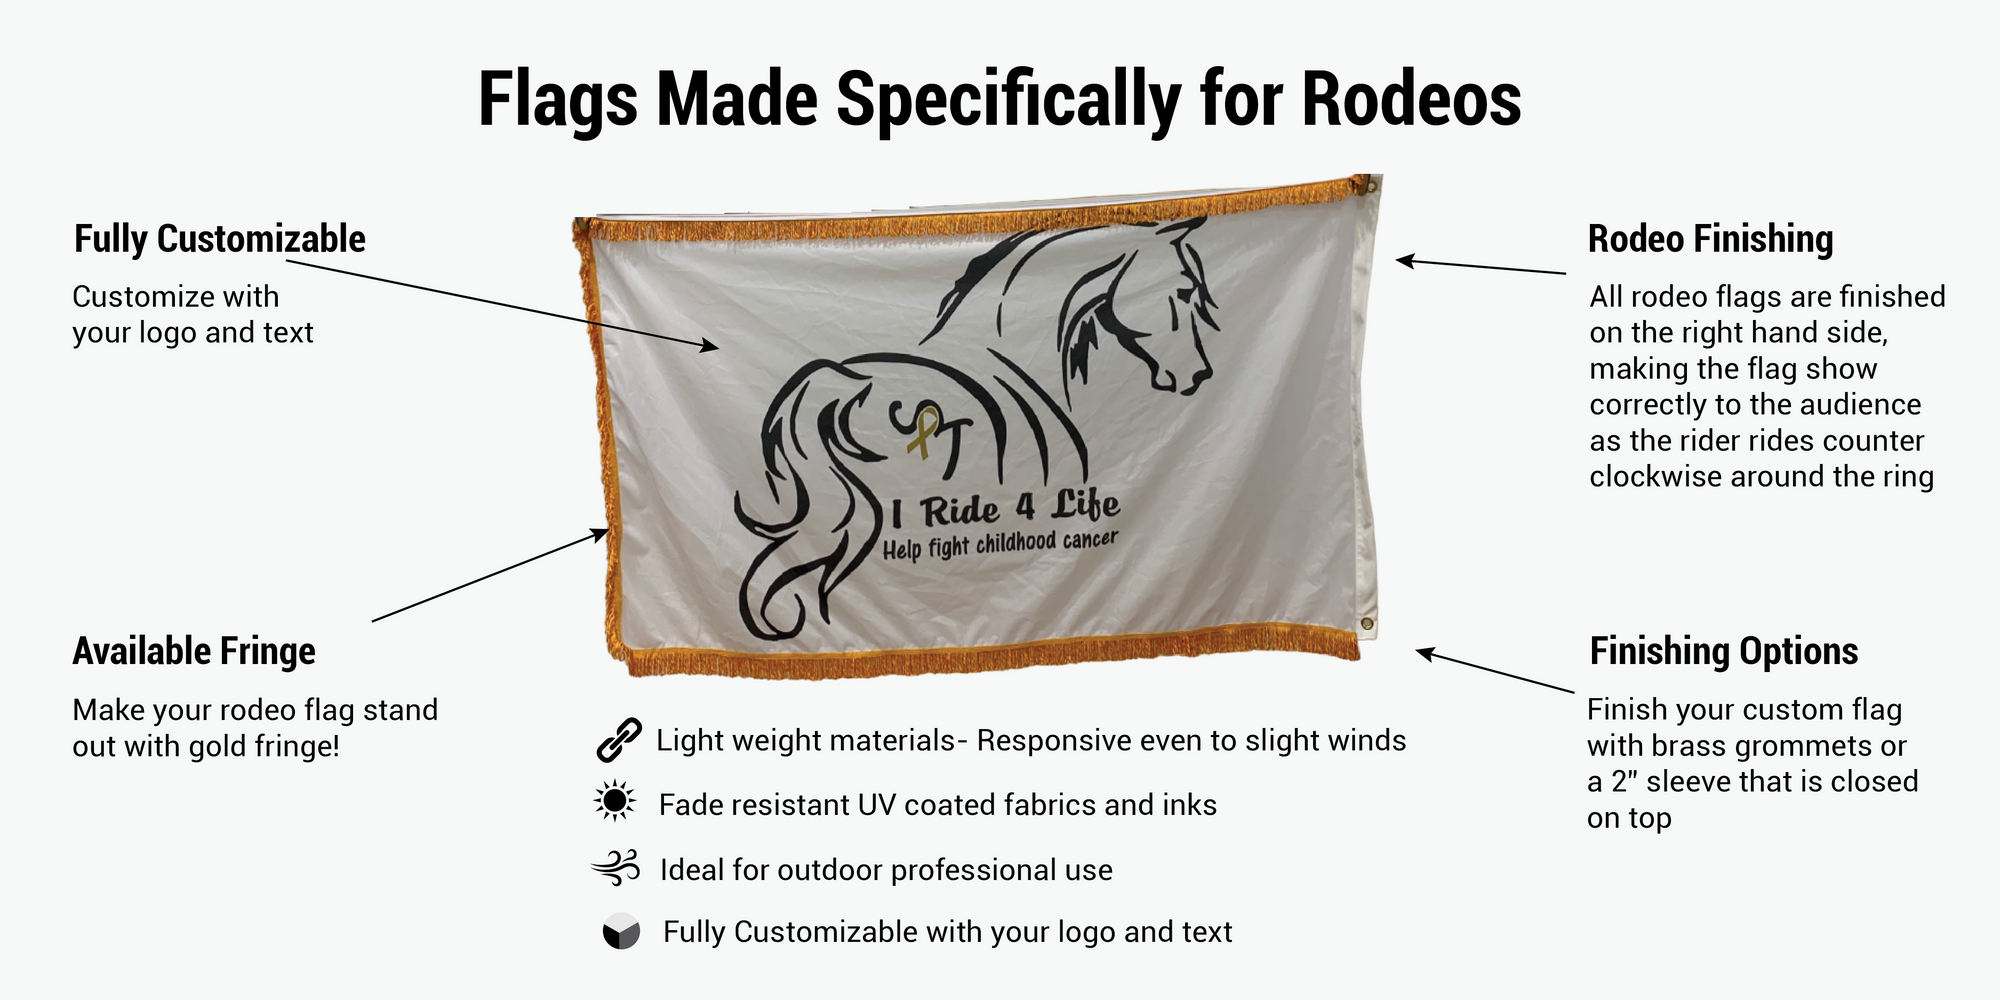 Custom Printed double sided rodeo flag with gold fringe. great for rodeo sponsor flags and can be custom printed